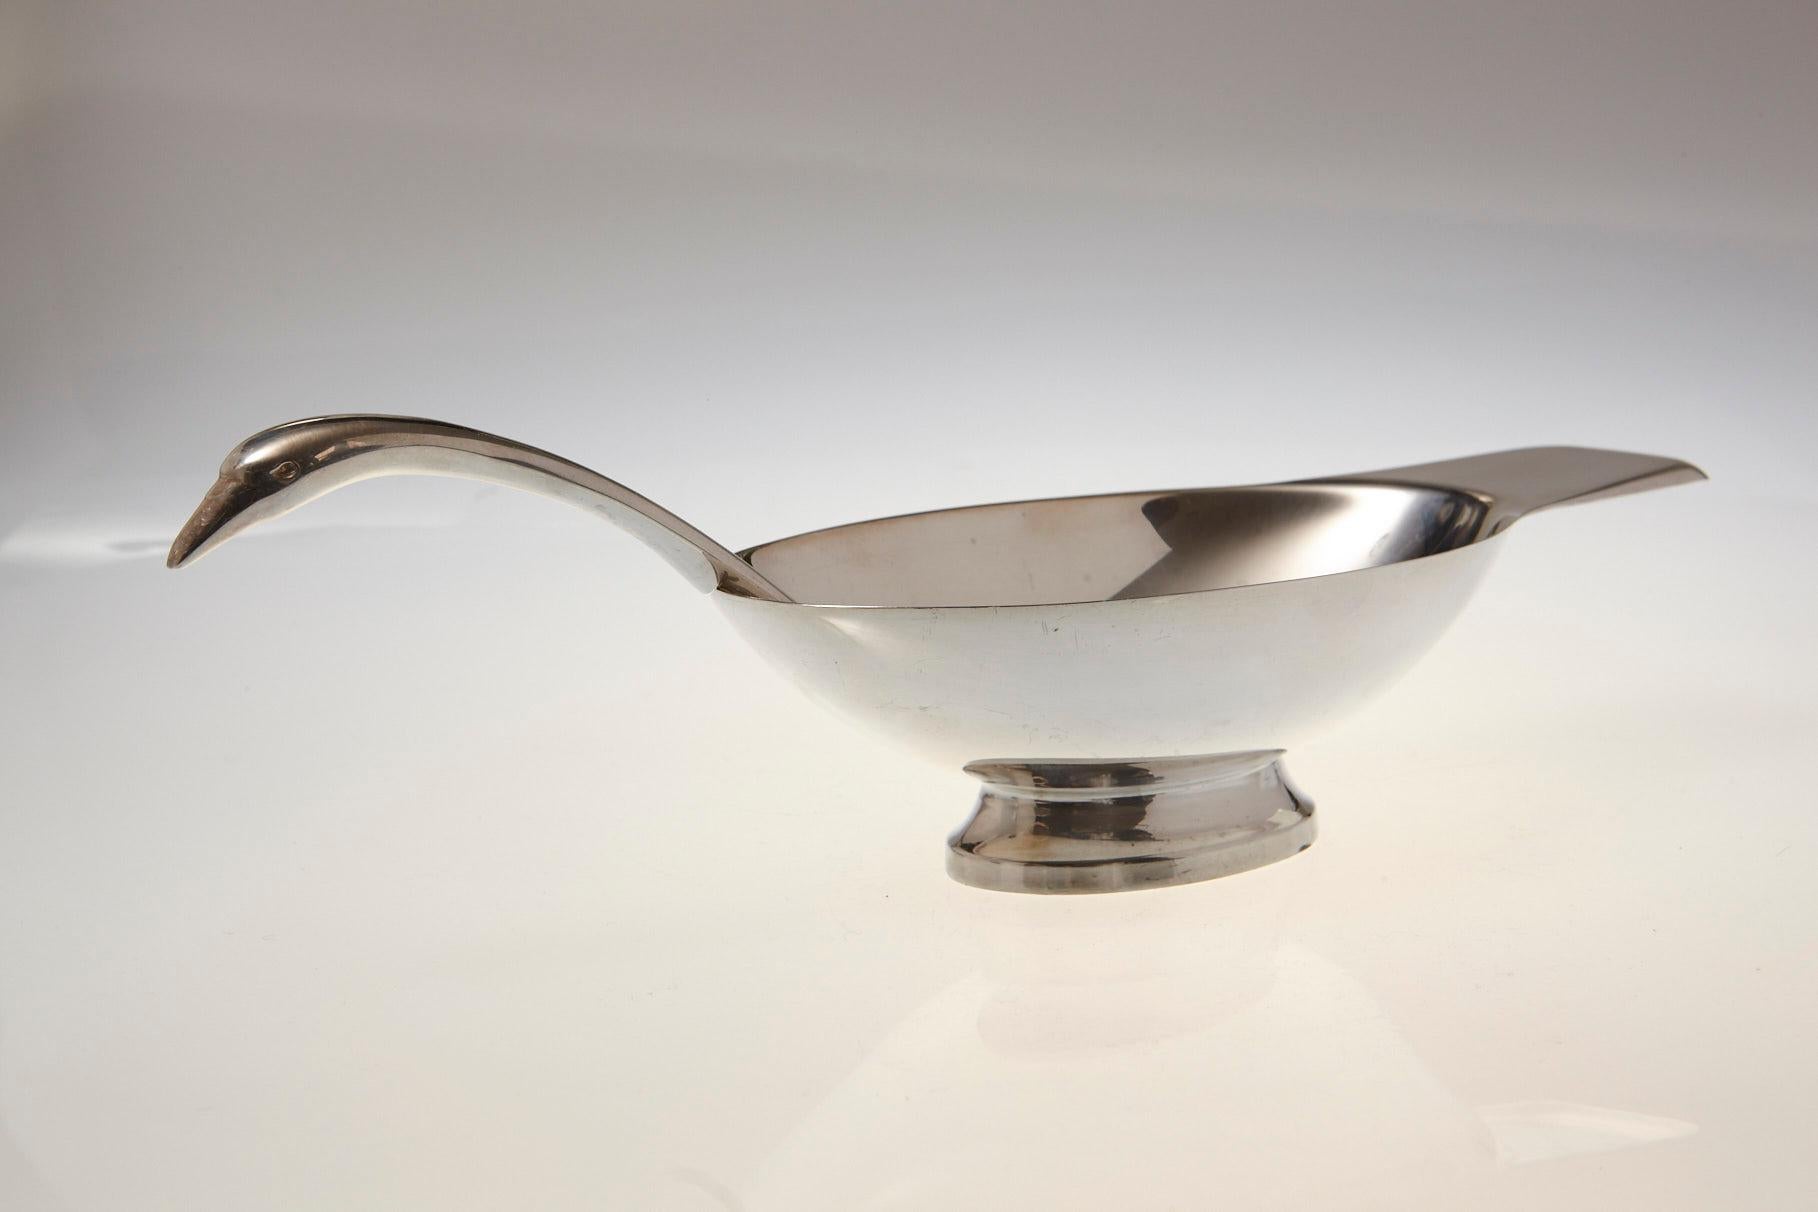 French Sauciere Cygne, Swan Gravy Boat by Christian Fjerdingstad for Christofle, 1935